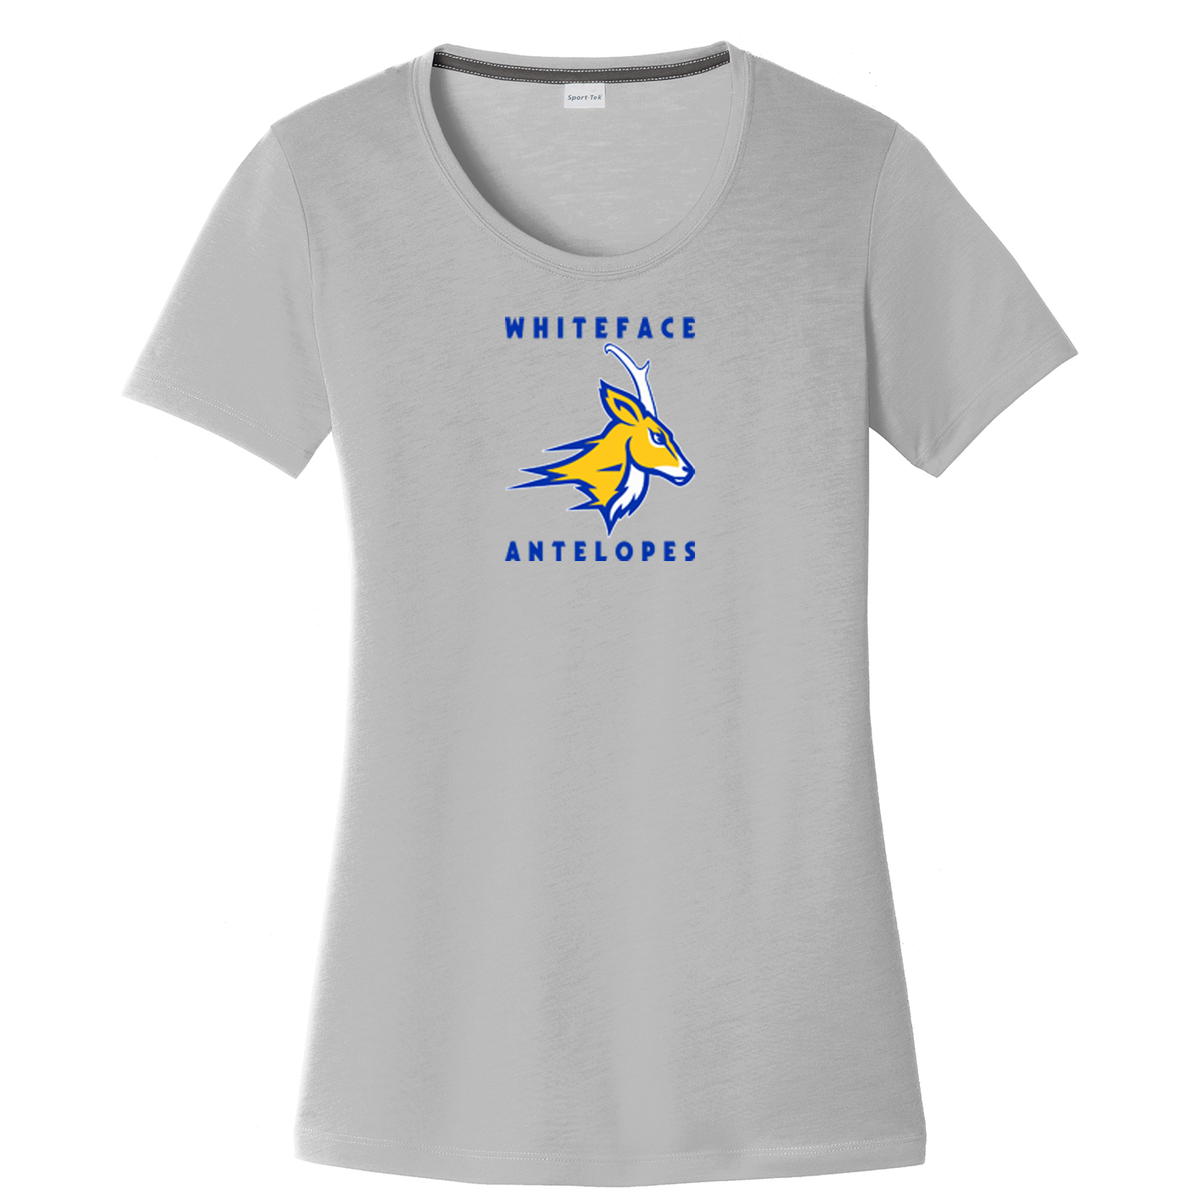 Whiteface Antelopes  Women's CottonTouch Performance T-Shirt